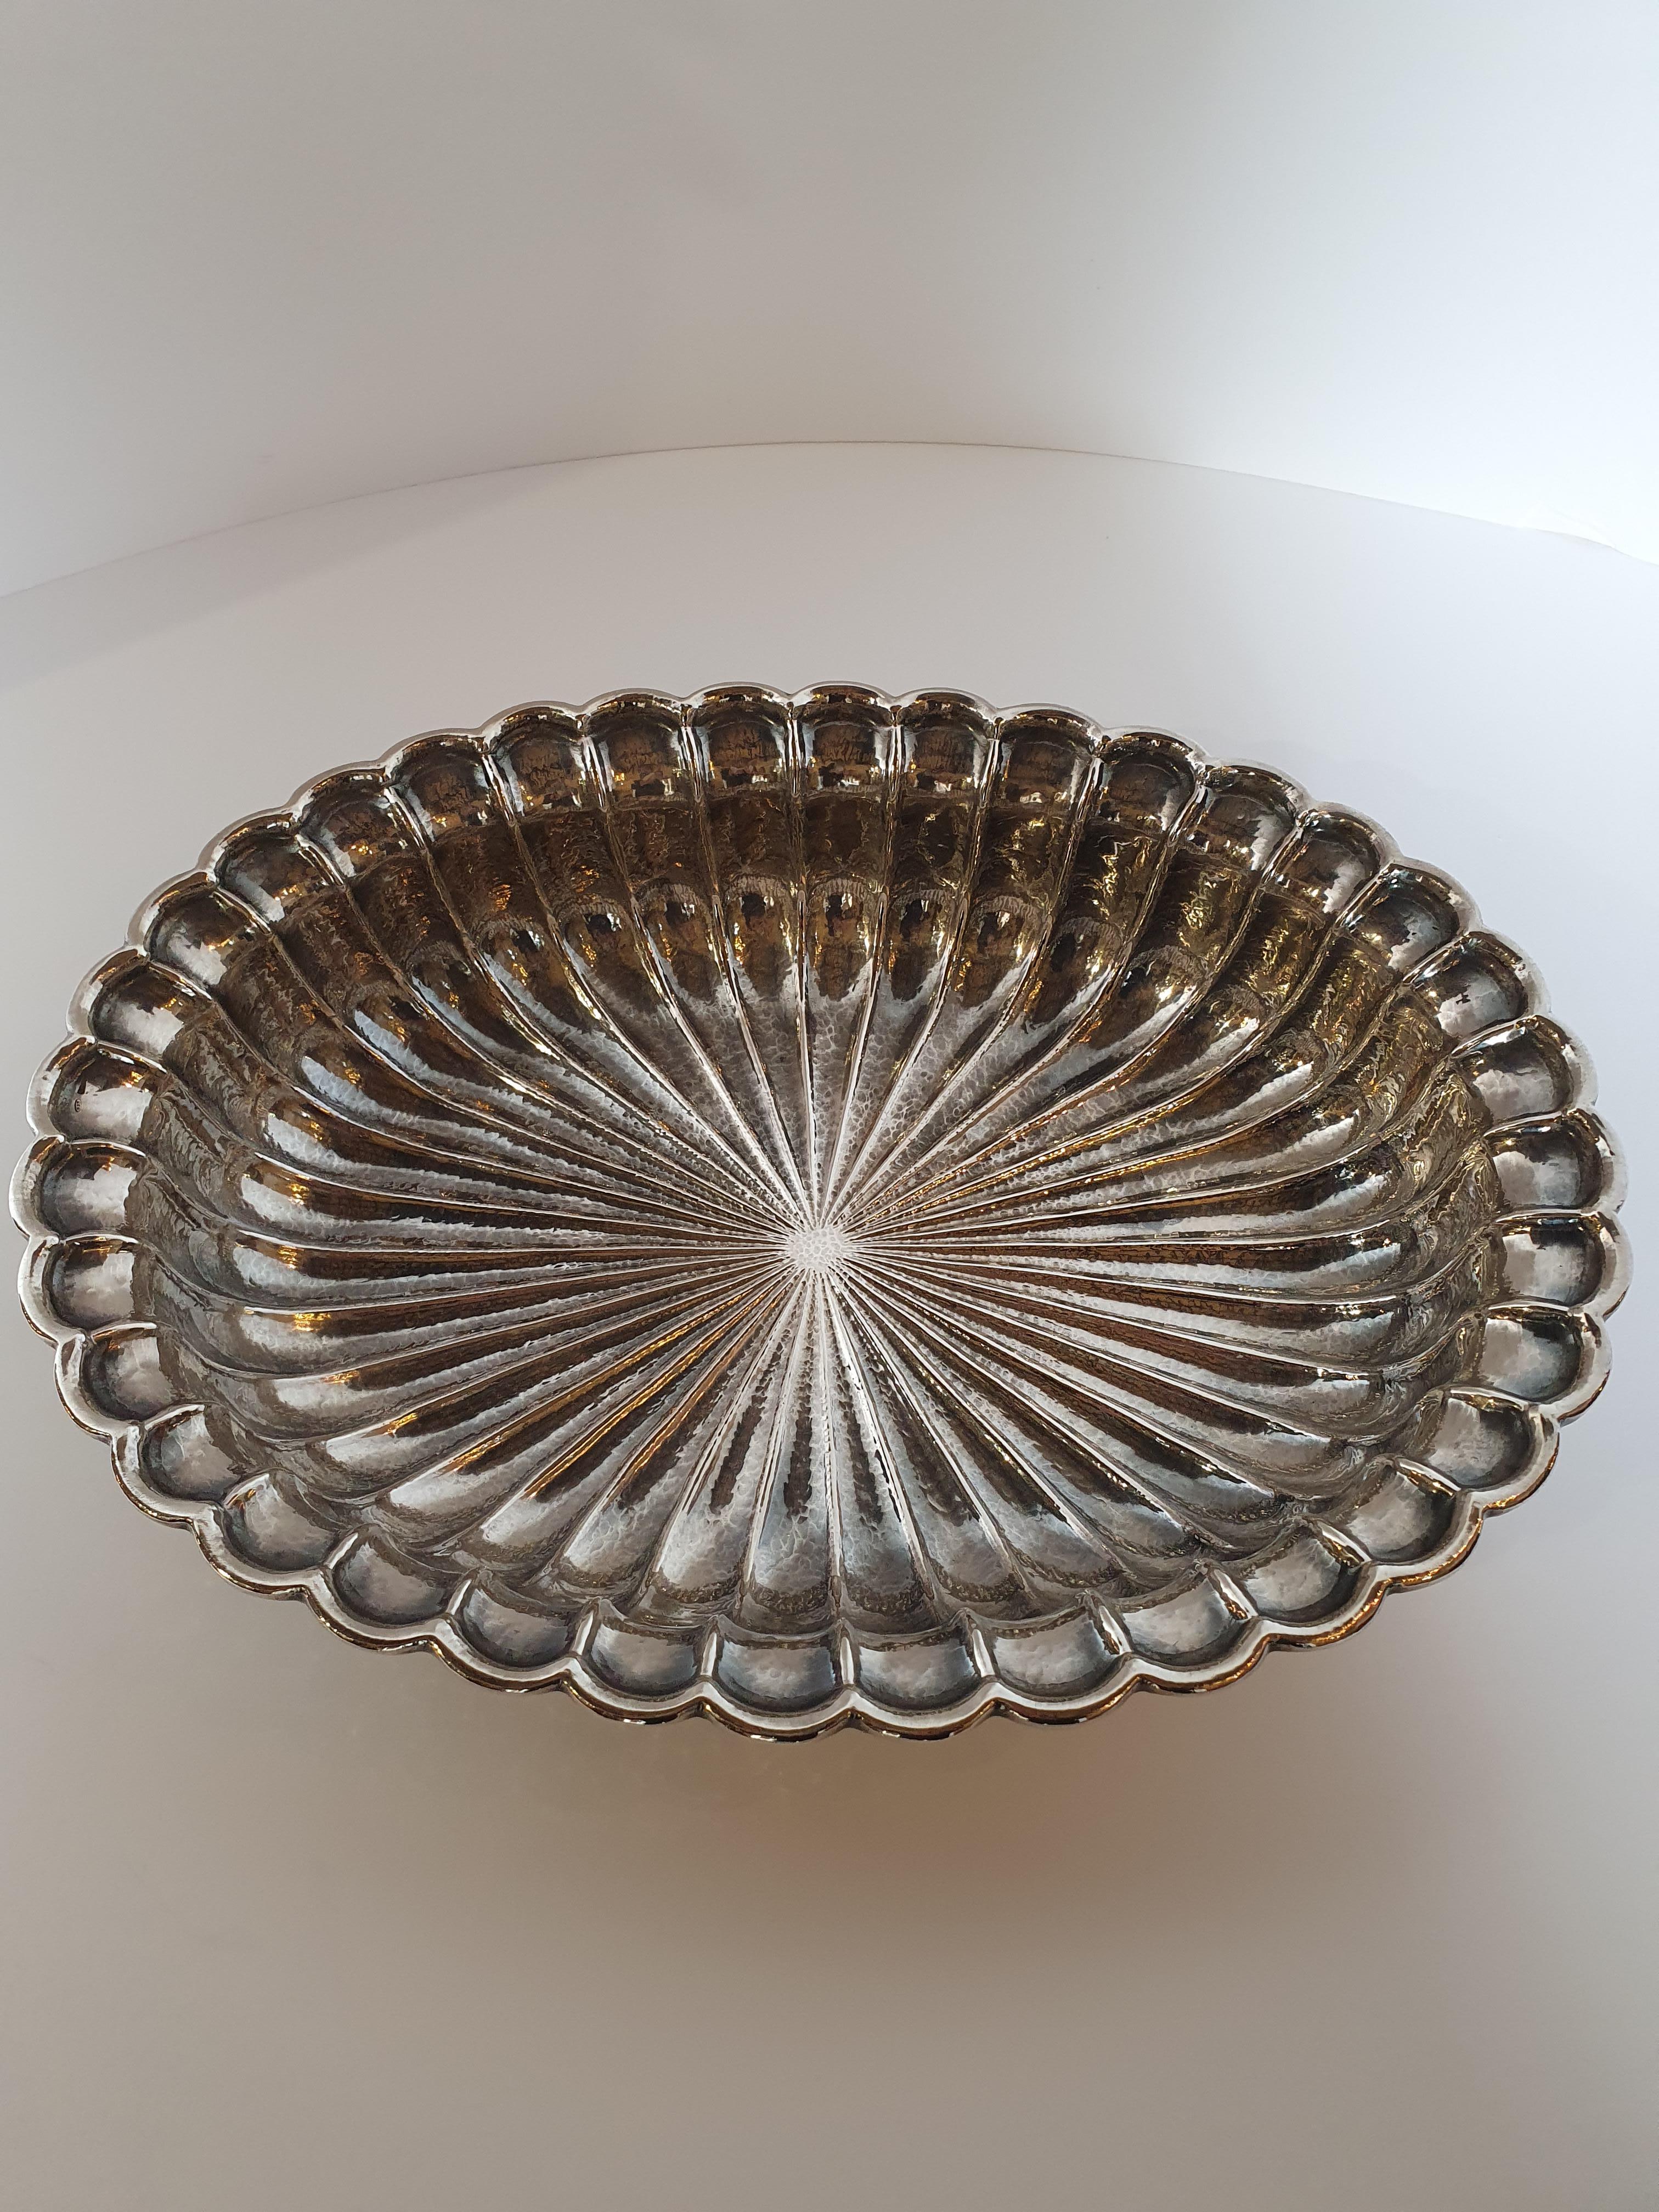 Italian 20th Century Hand-Made Sterling Silver Oval Bowl by Ilario Pradella, Italy, 1980 For Sale